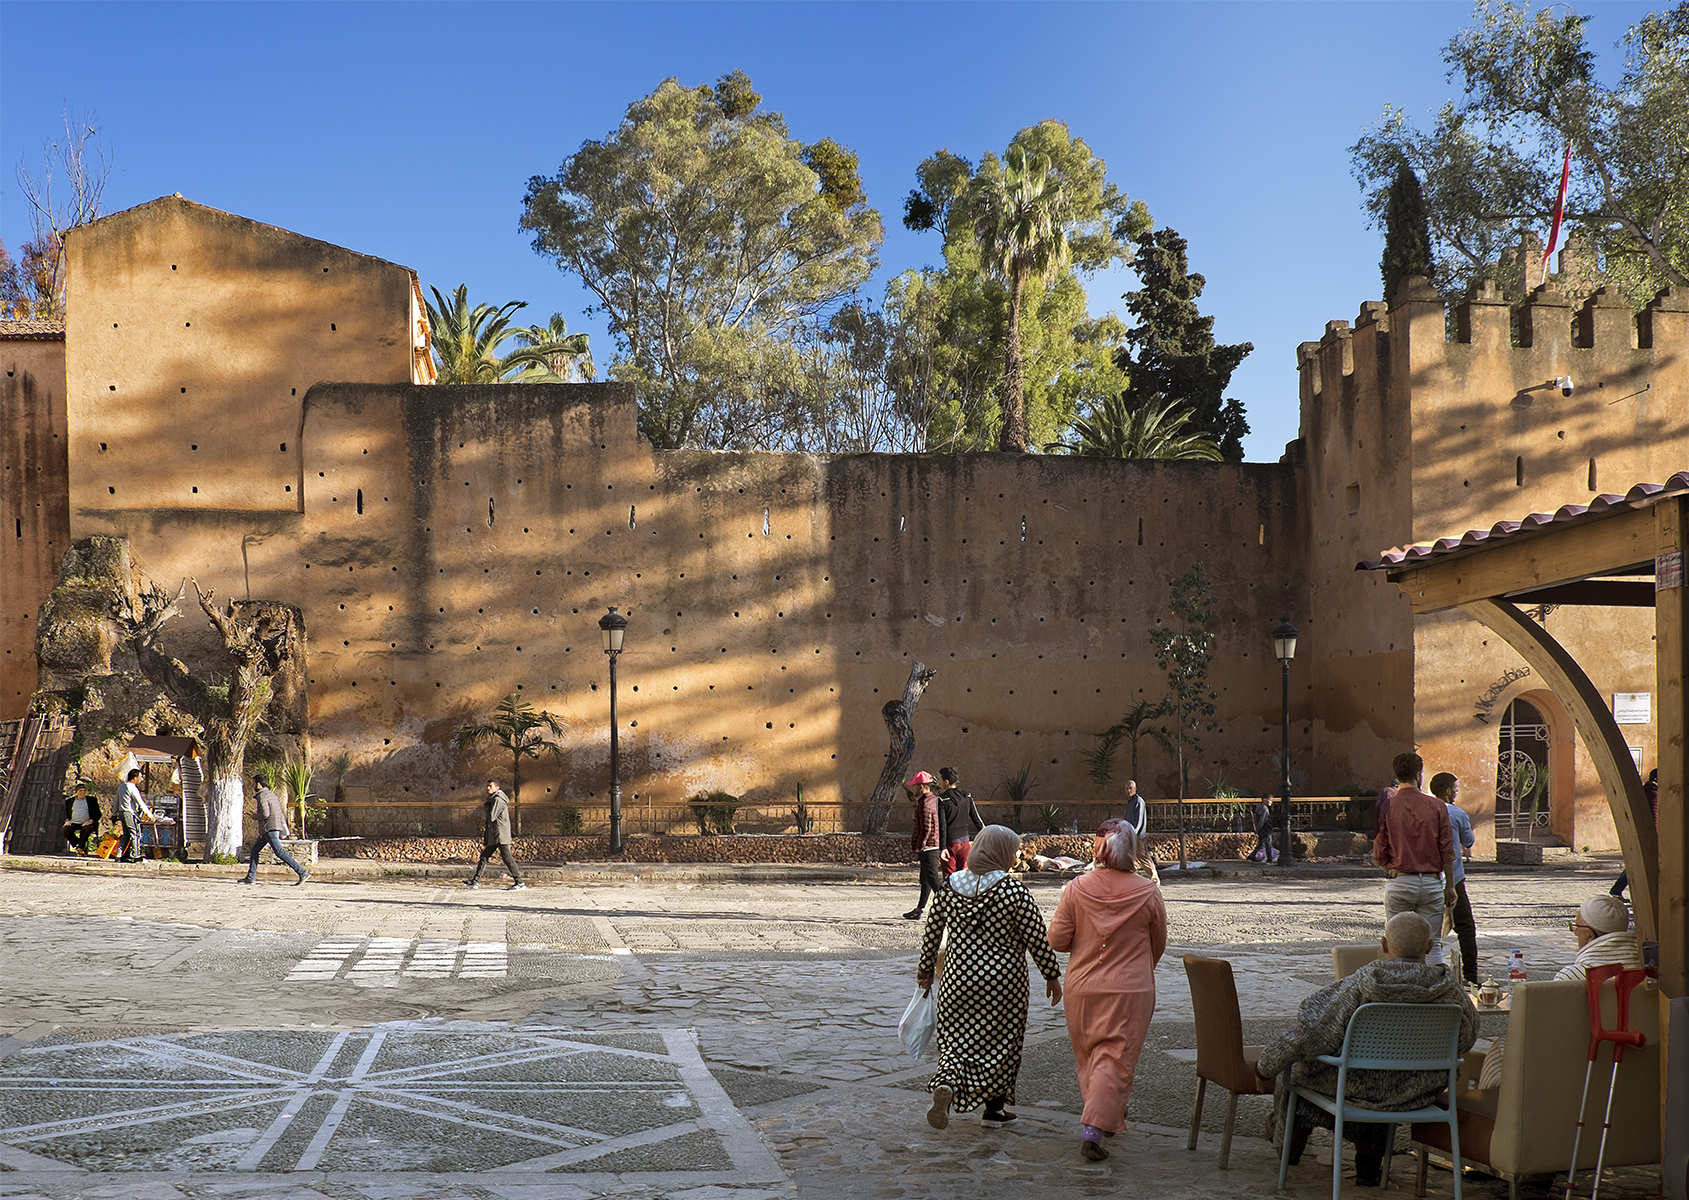 Plaza outside Casbah Walls, Chefchauen, Morocco<p><a class="nav-link" href="/content.html?page=6/#TA70" target="_top">Thumbnail</a>